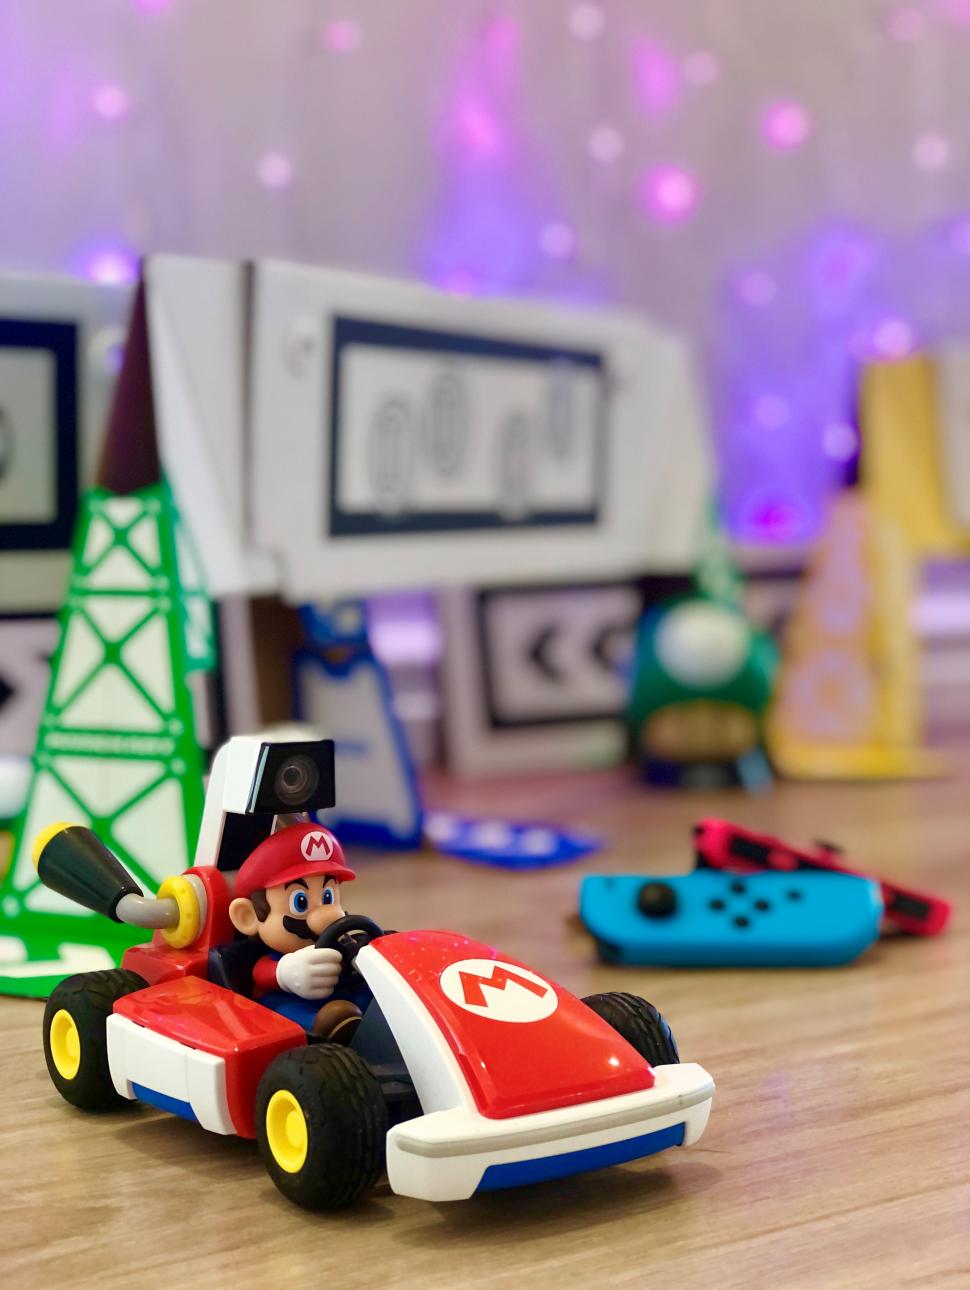 Image shows a red care with the character Mario sitting in it.